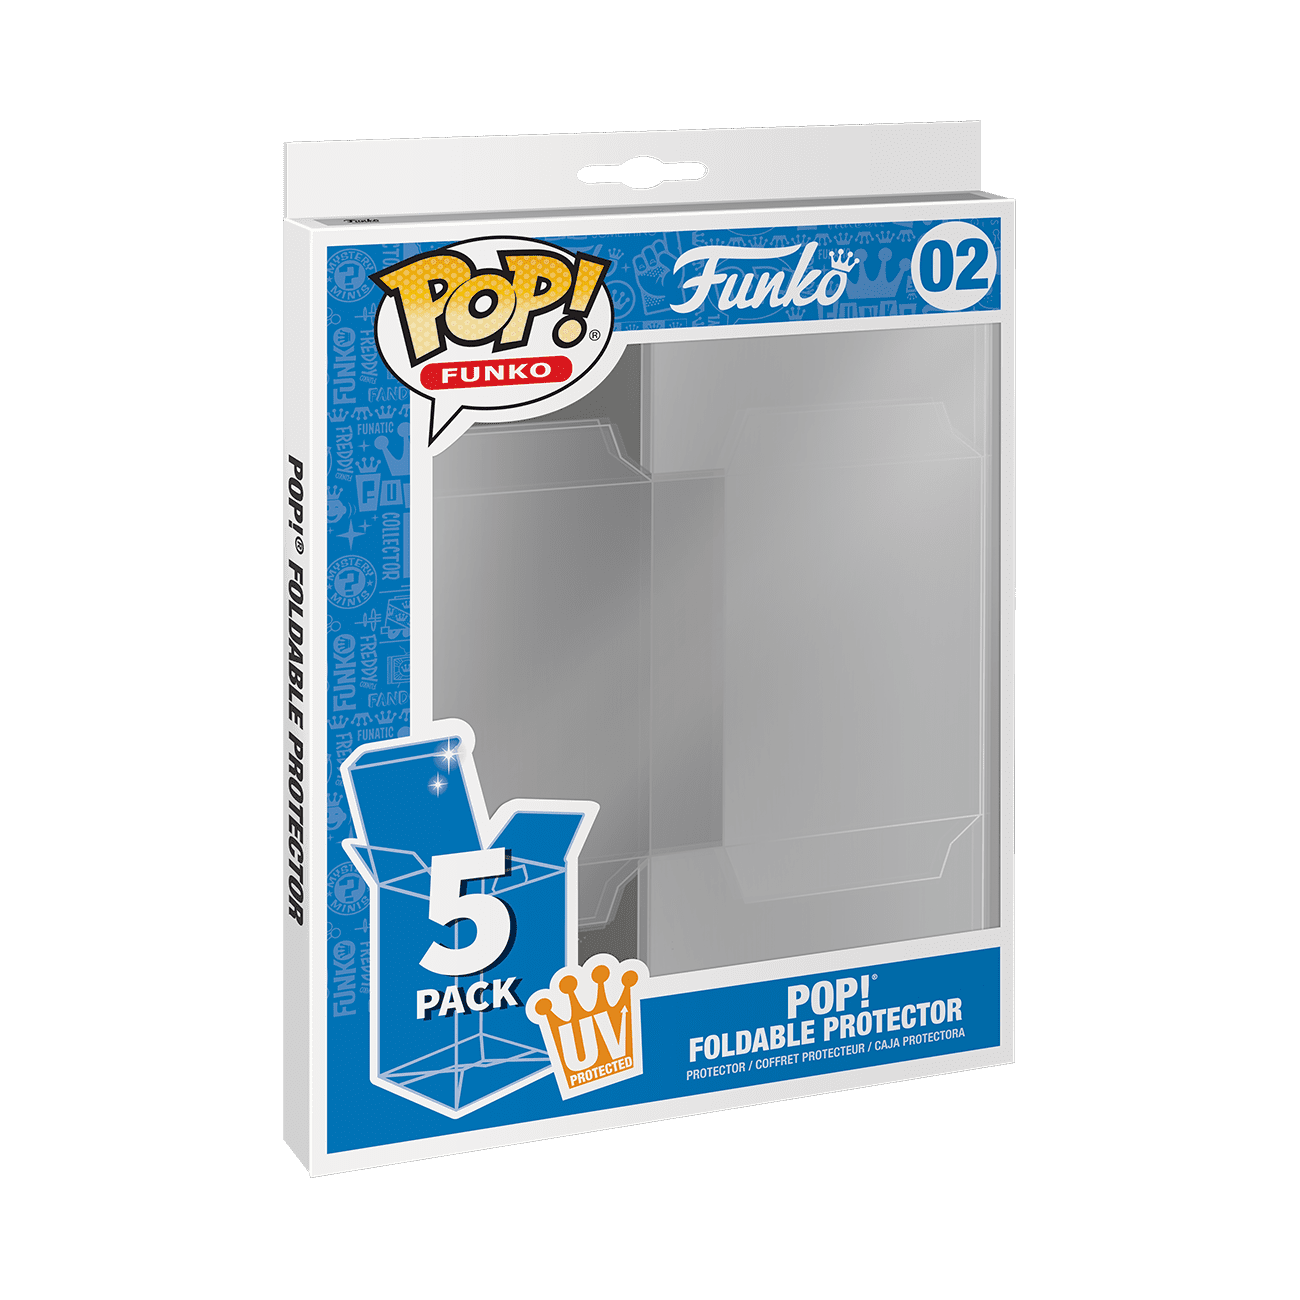 ULTRA PRO anti-UV transparent protection for POP figures